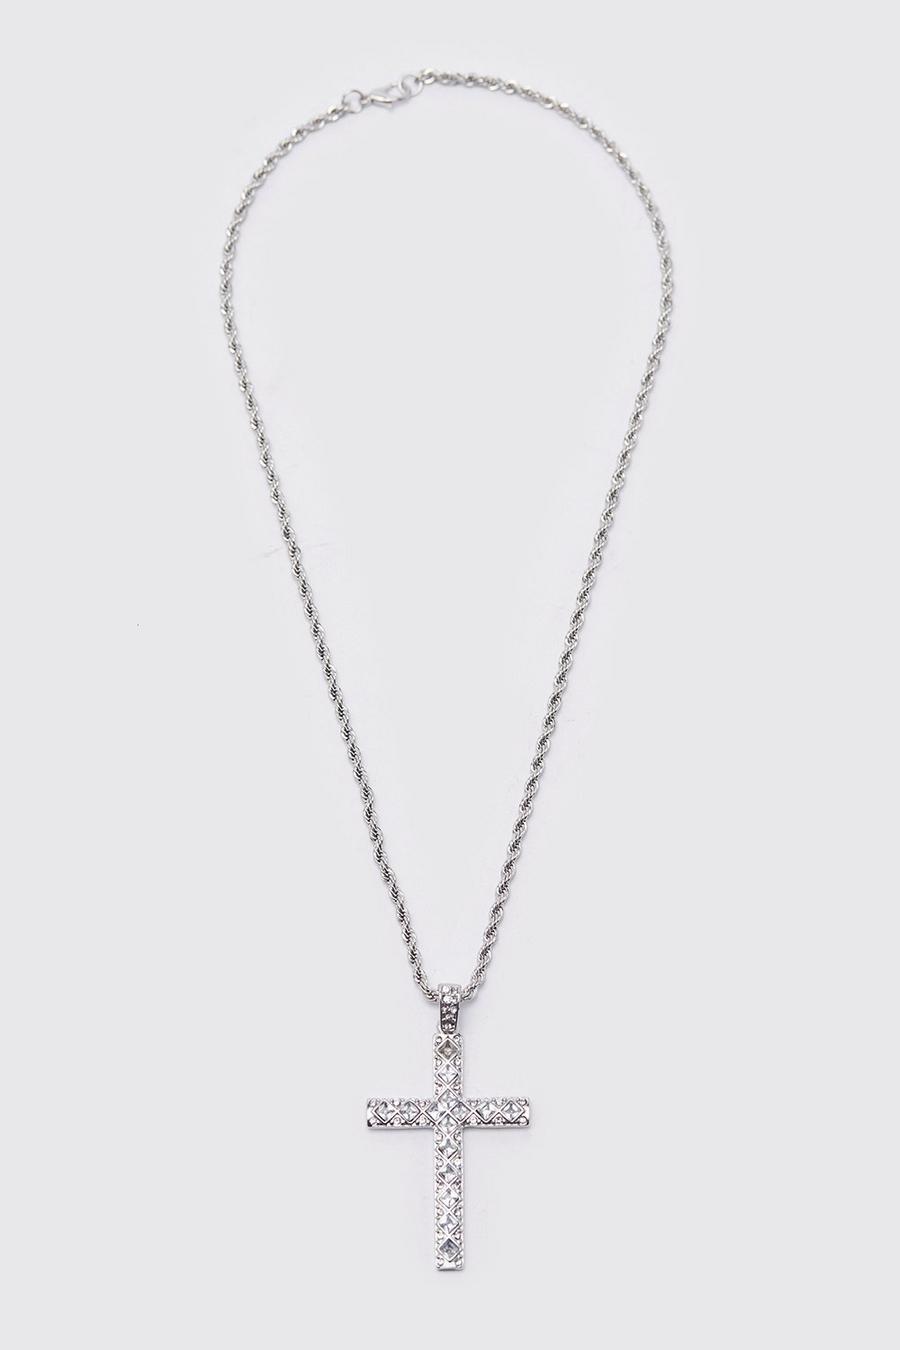 Silver Iced Crystal Cross Necklace with Gift Bag